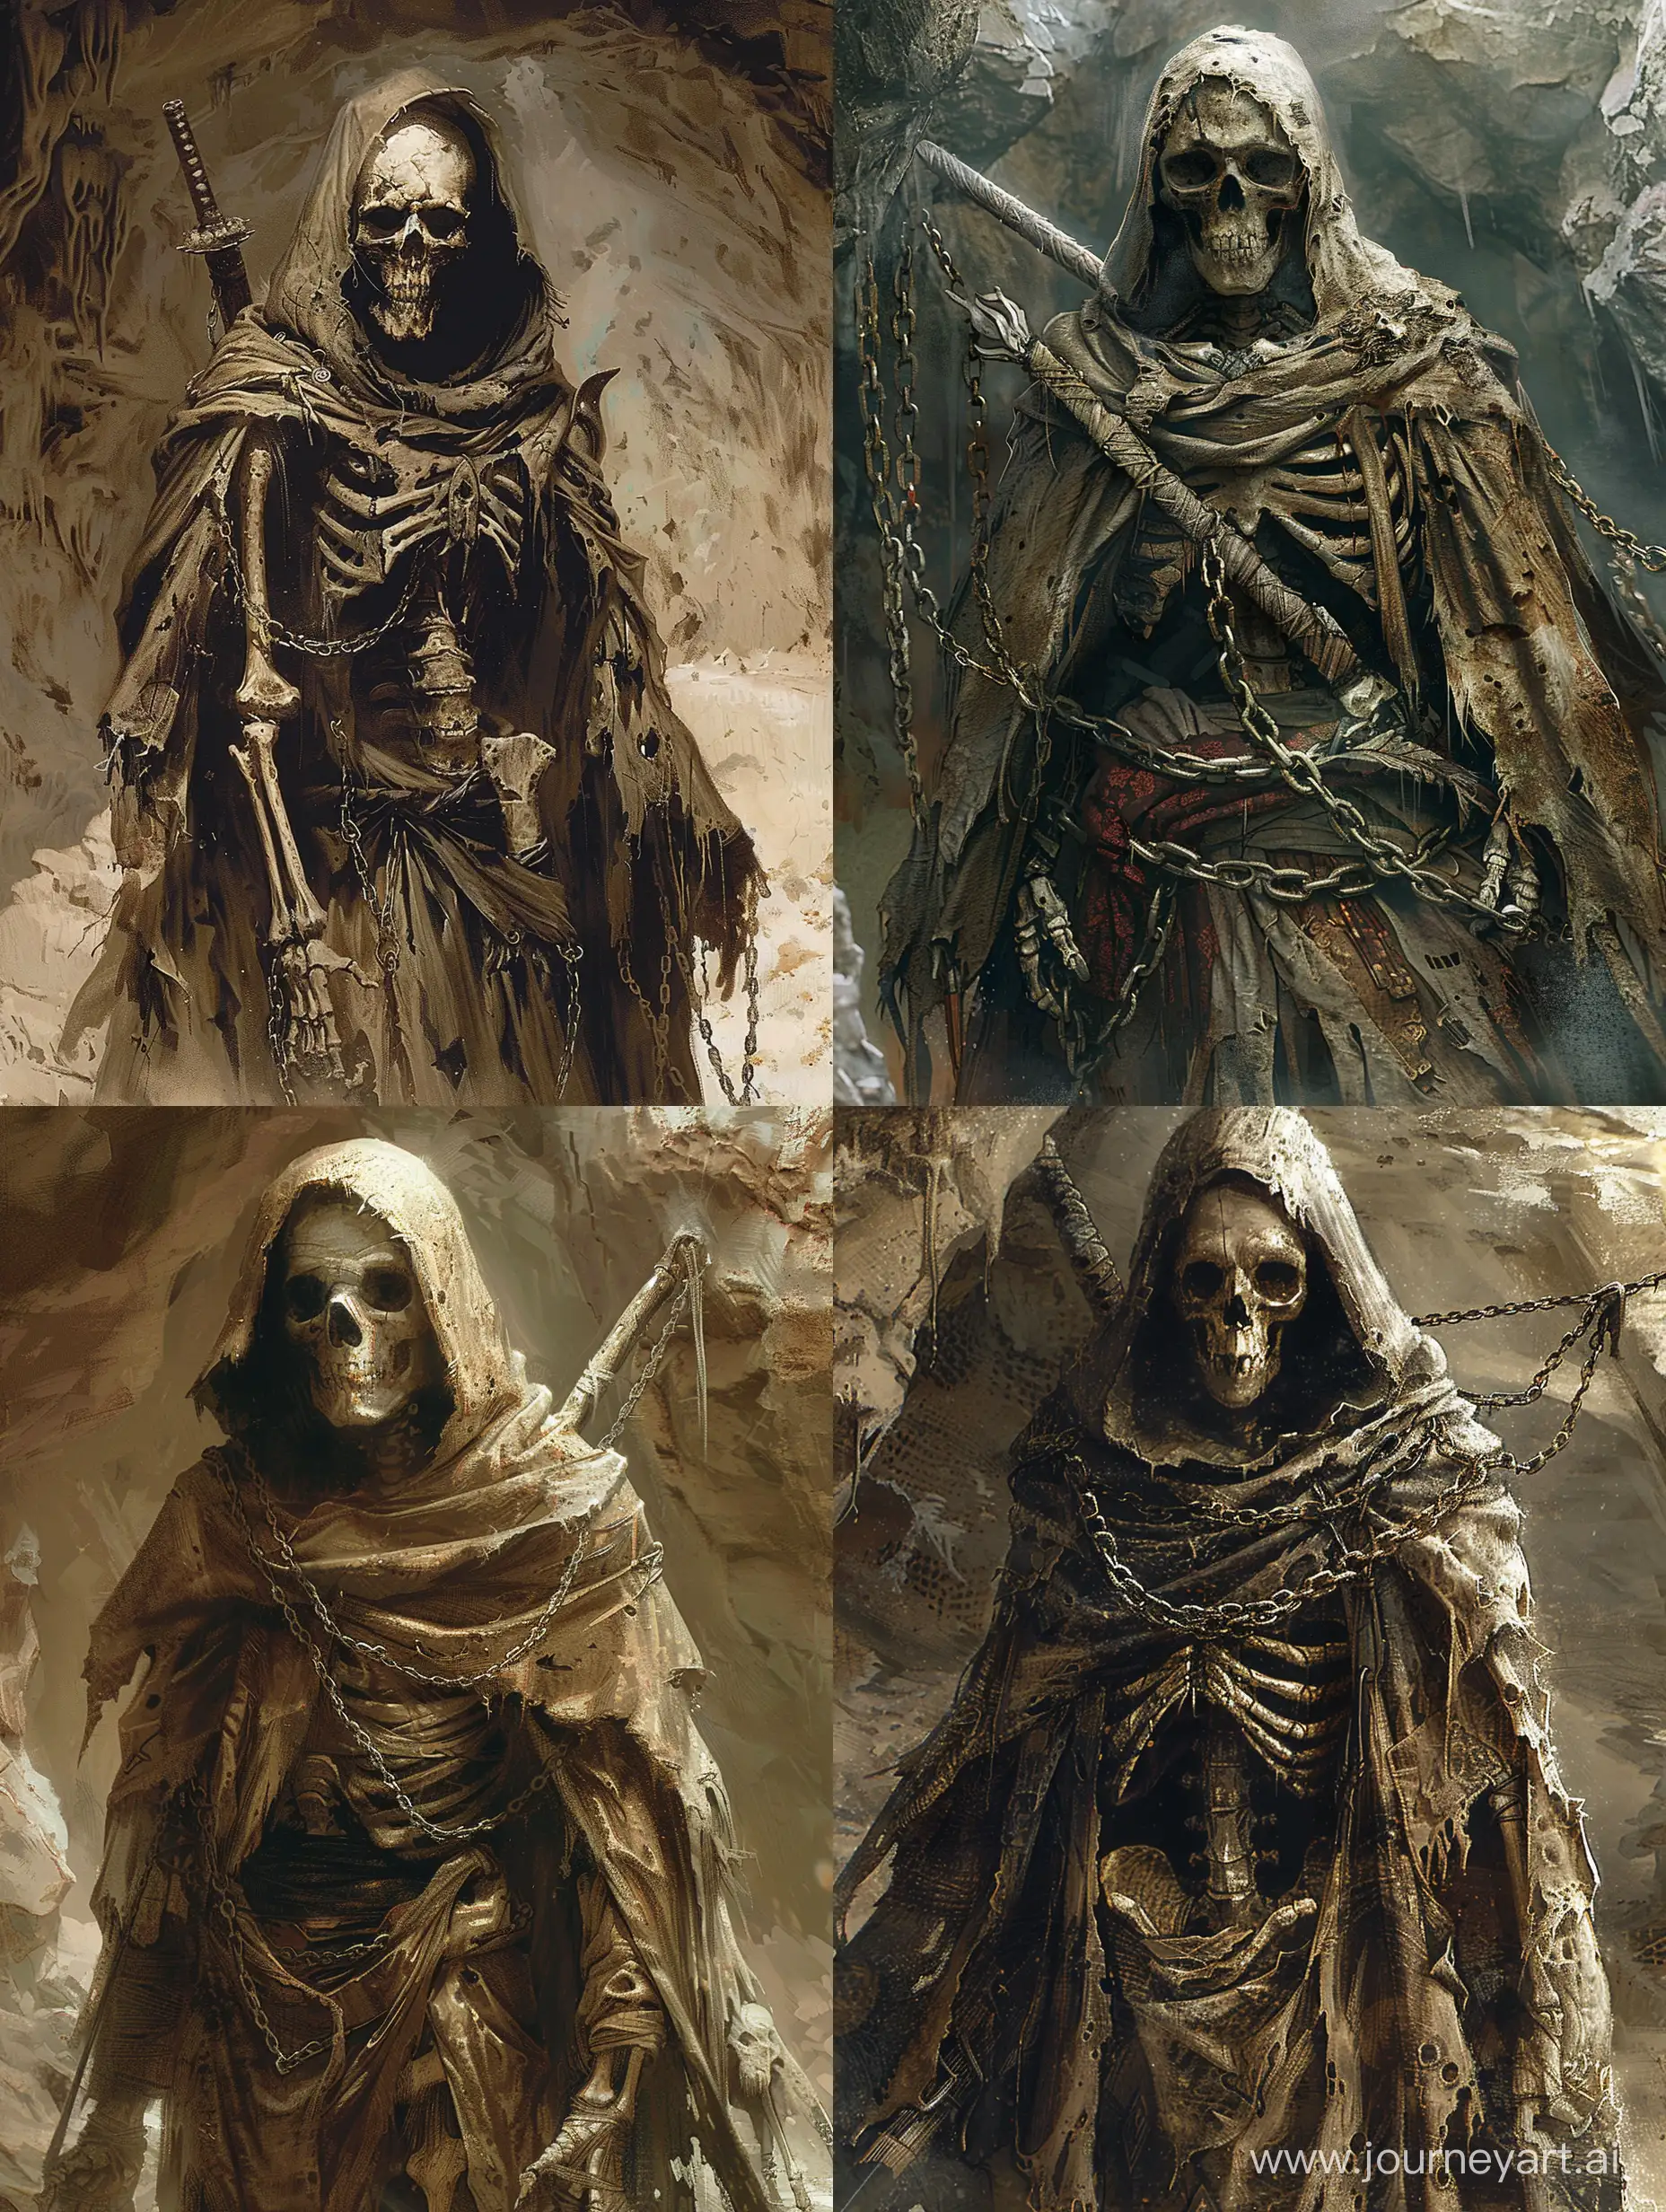 Terrifying-Skeleton-Warrior-in-Tattered-Robes-and-Hooded-Cloak